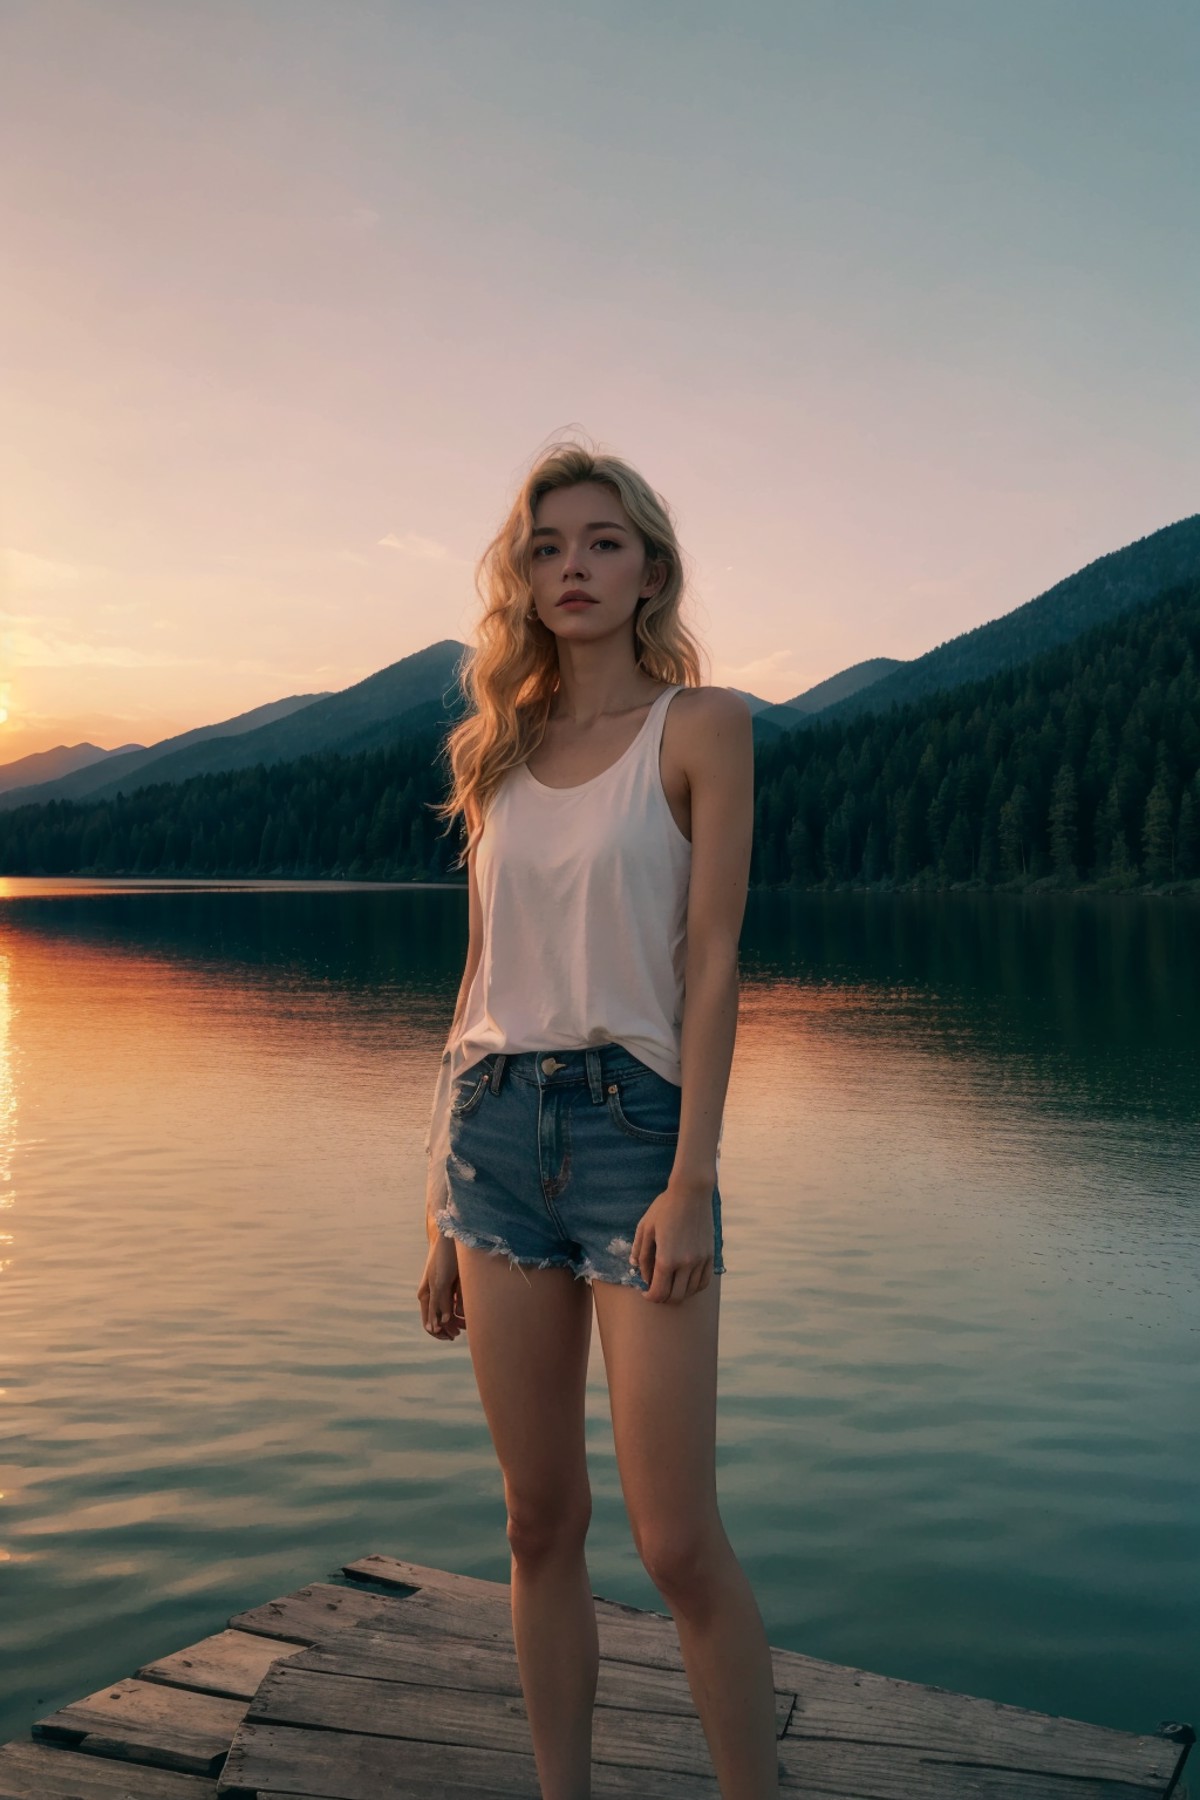 A young woman stands on a weathered wooden dock extending over a still mountain lake at dusk. Dressed in cutoff denim shor...